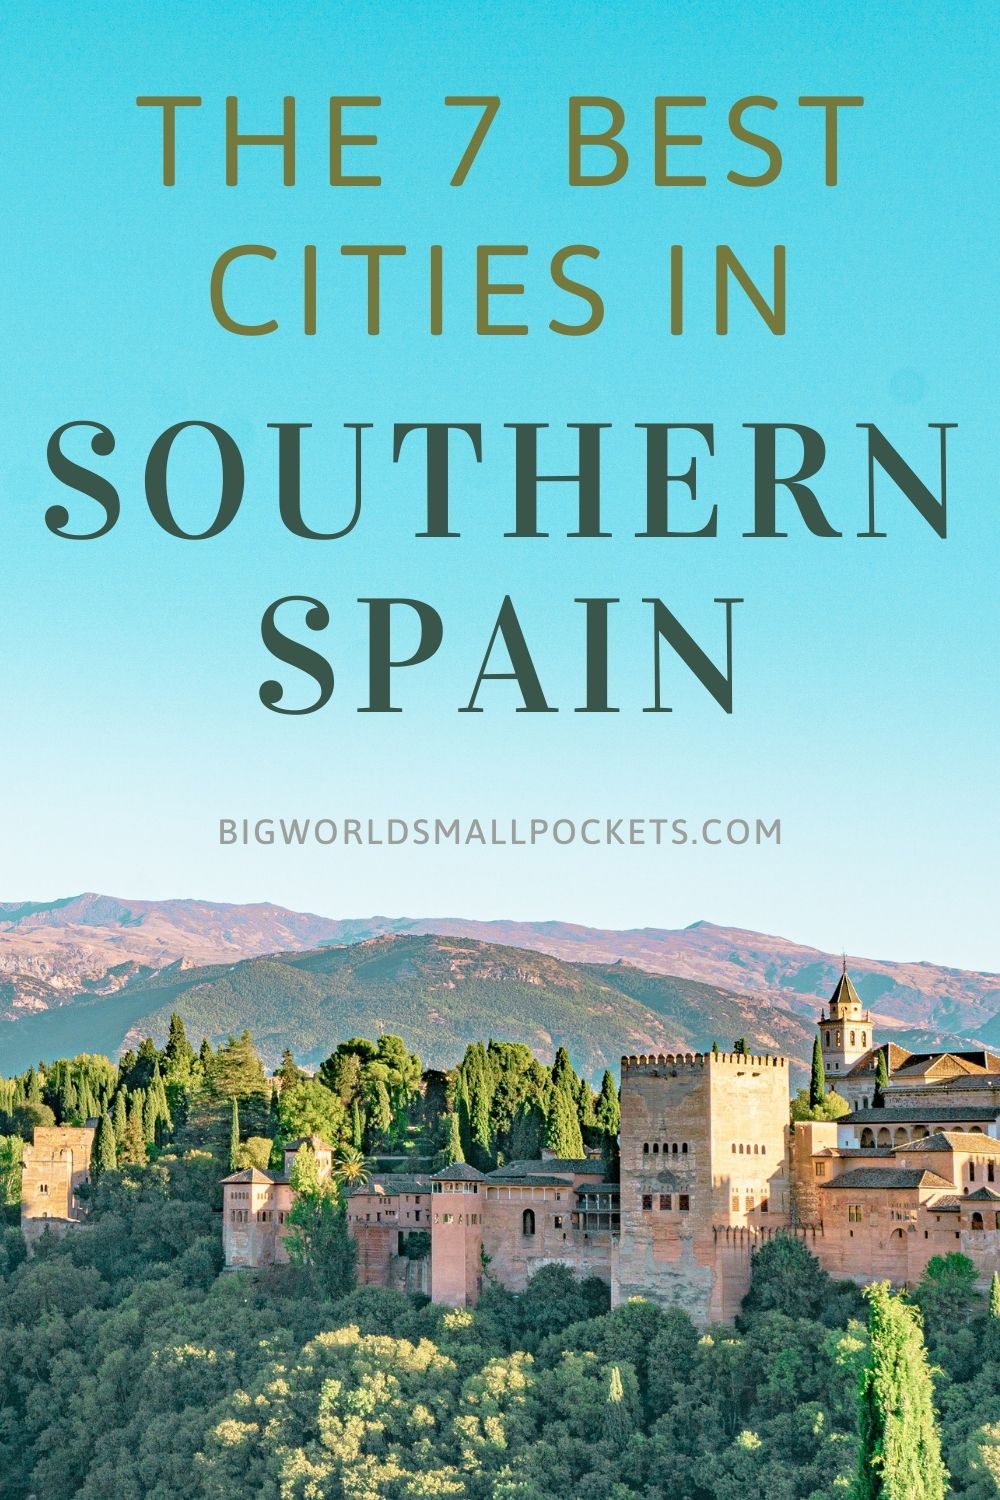 The 7 Best Cities in Southern Spain